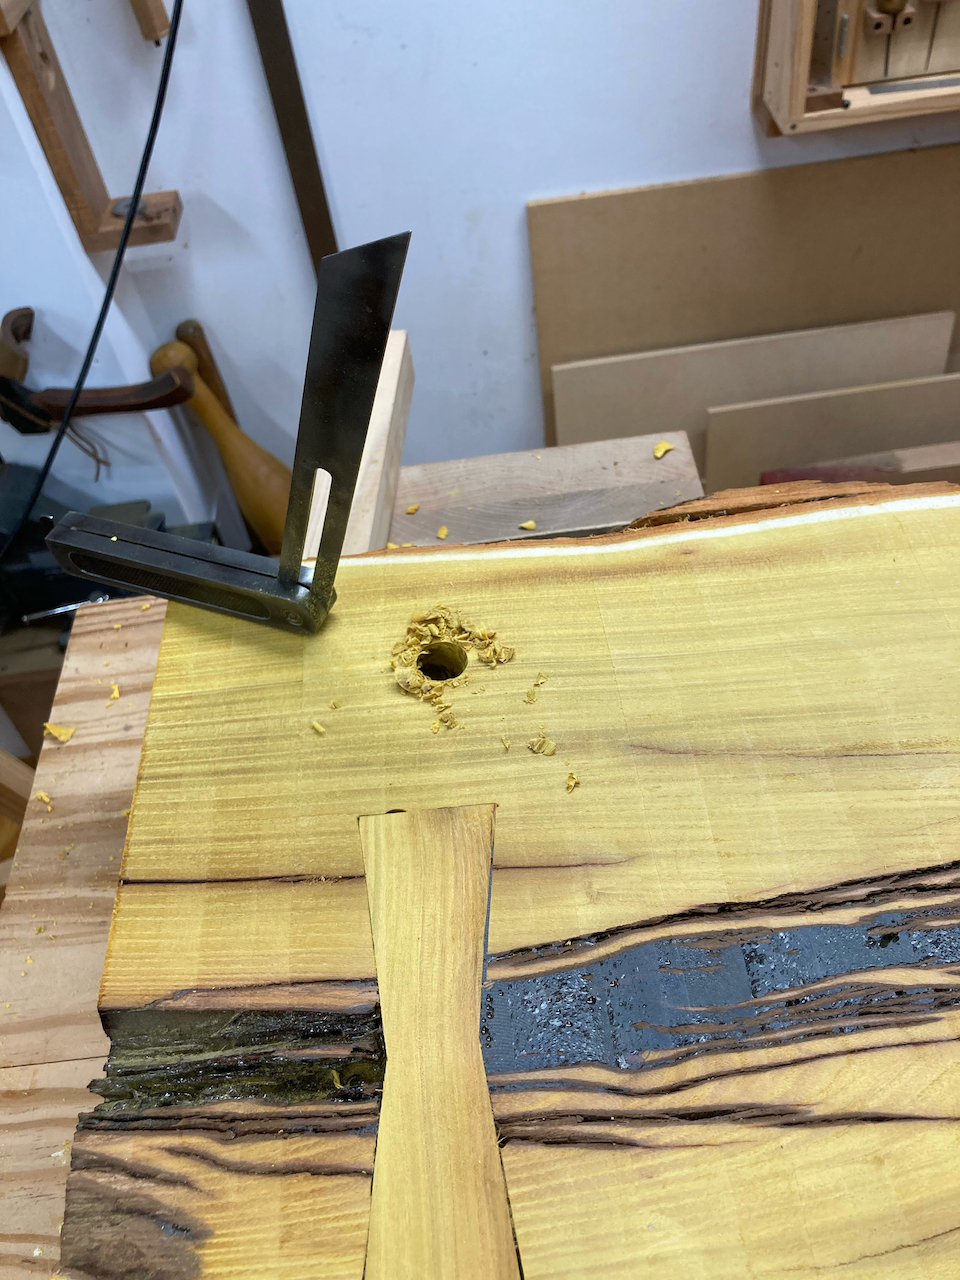 Hole finished from the top to reduce tearout